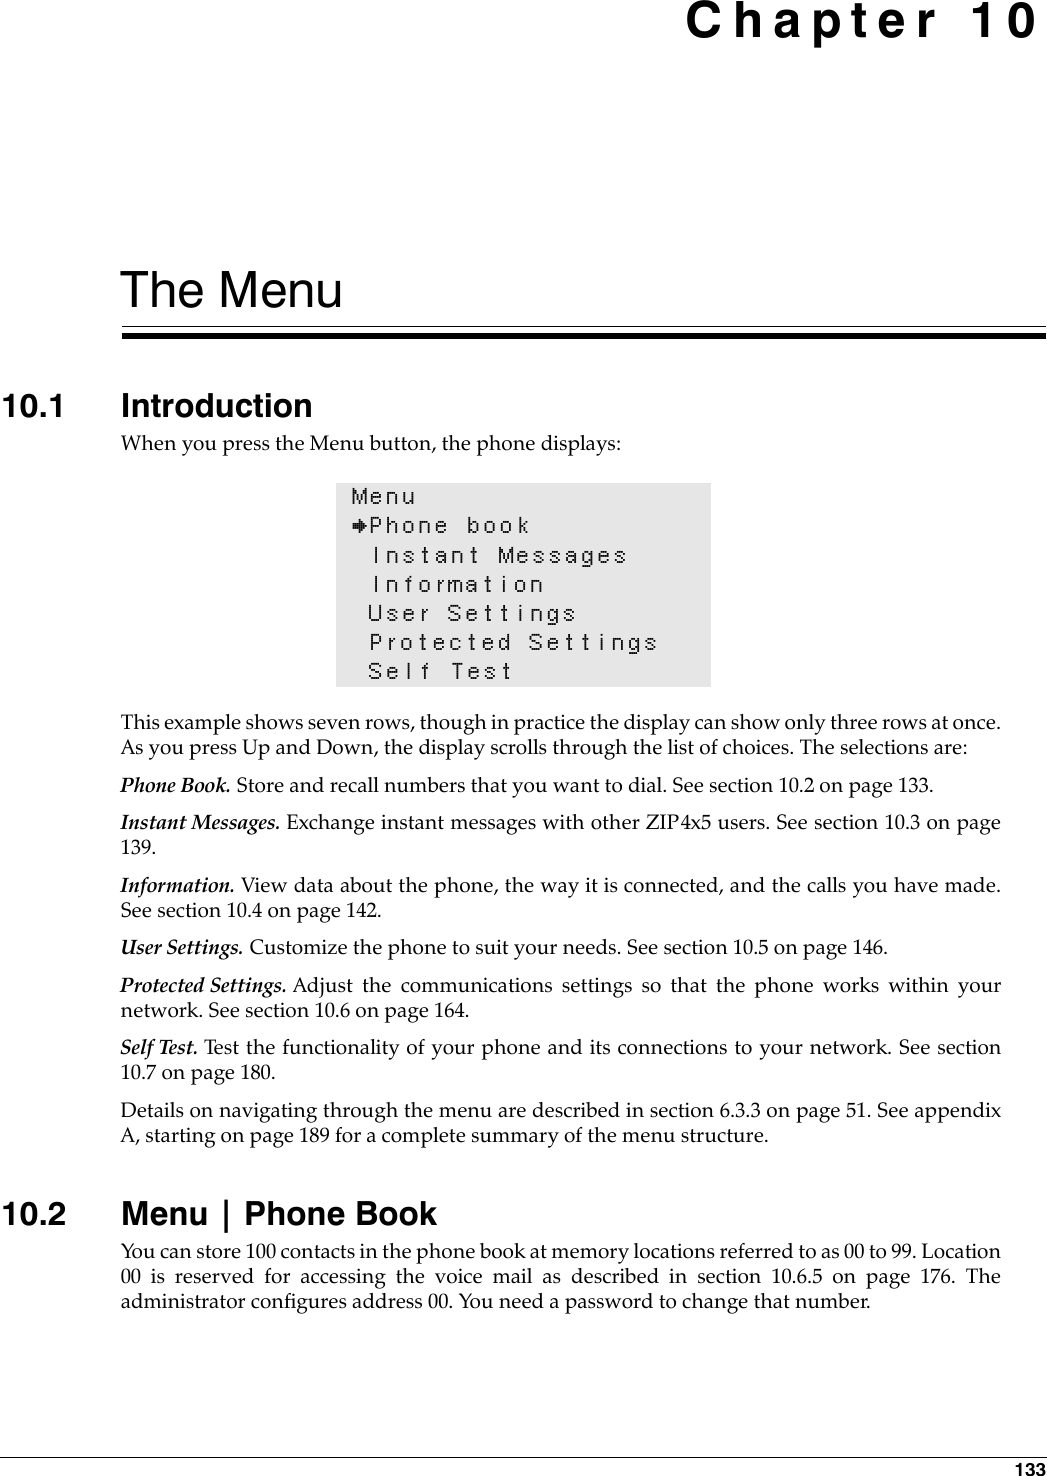 133 Chapter 10The Menu10.1 IntroductionWhen you press the Menu button, the phone displays:This example shows seven rows, though in practice the display can show only three rows at once.As you press Up and Down, the display scrolls through the list of choices. The selections are:Phone Book. Store and recall numbers that you want to dial. See section 10.2 on page 133.Instant Messages. Exchange instant messages with other ZIP4x5 users. See section 10.3 on page139.Information. View data about the phone, the way it is connected, and the calls you have made.See section 10.4 on page 142.User Settings. Customize the phone to suit your needs. See section 10.5 on page 146.Protected Settings. Adjust the communications settings so that the phone works within yournetwork. See section 10.6 on page 164.Self Test. Test the functionality of your phone and its connections to your network. See section10.7 on page 180.Details on navigating through the menu are described in section 6.3.3 on page 51. See appendixA, starting on page 189 for a complete summary of the menu structure.10.2 Menu | Phone BookYou can store 100 contacts in the phone book at memory locations referred to as 00 to 99. Location00 is reserved for accessing the voice mail as described in section 10.6.5 on page 176. Theadministrator configures address 00. You need a password to change that number.Menu}Phone bookInstant MessagesInformationUser SettingsProtected SettingsSelf Test